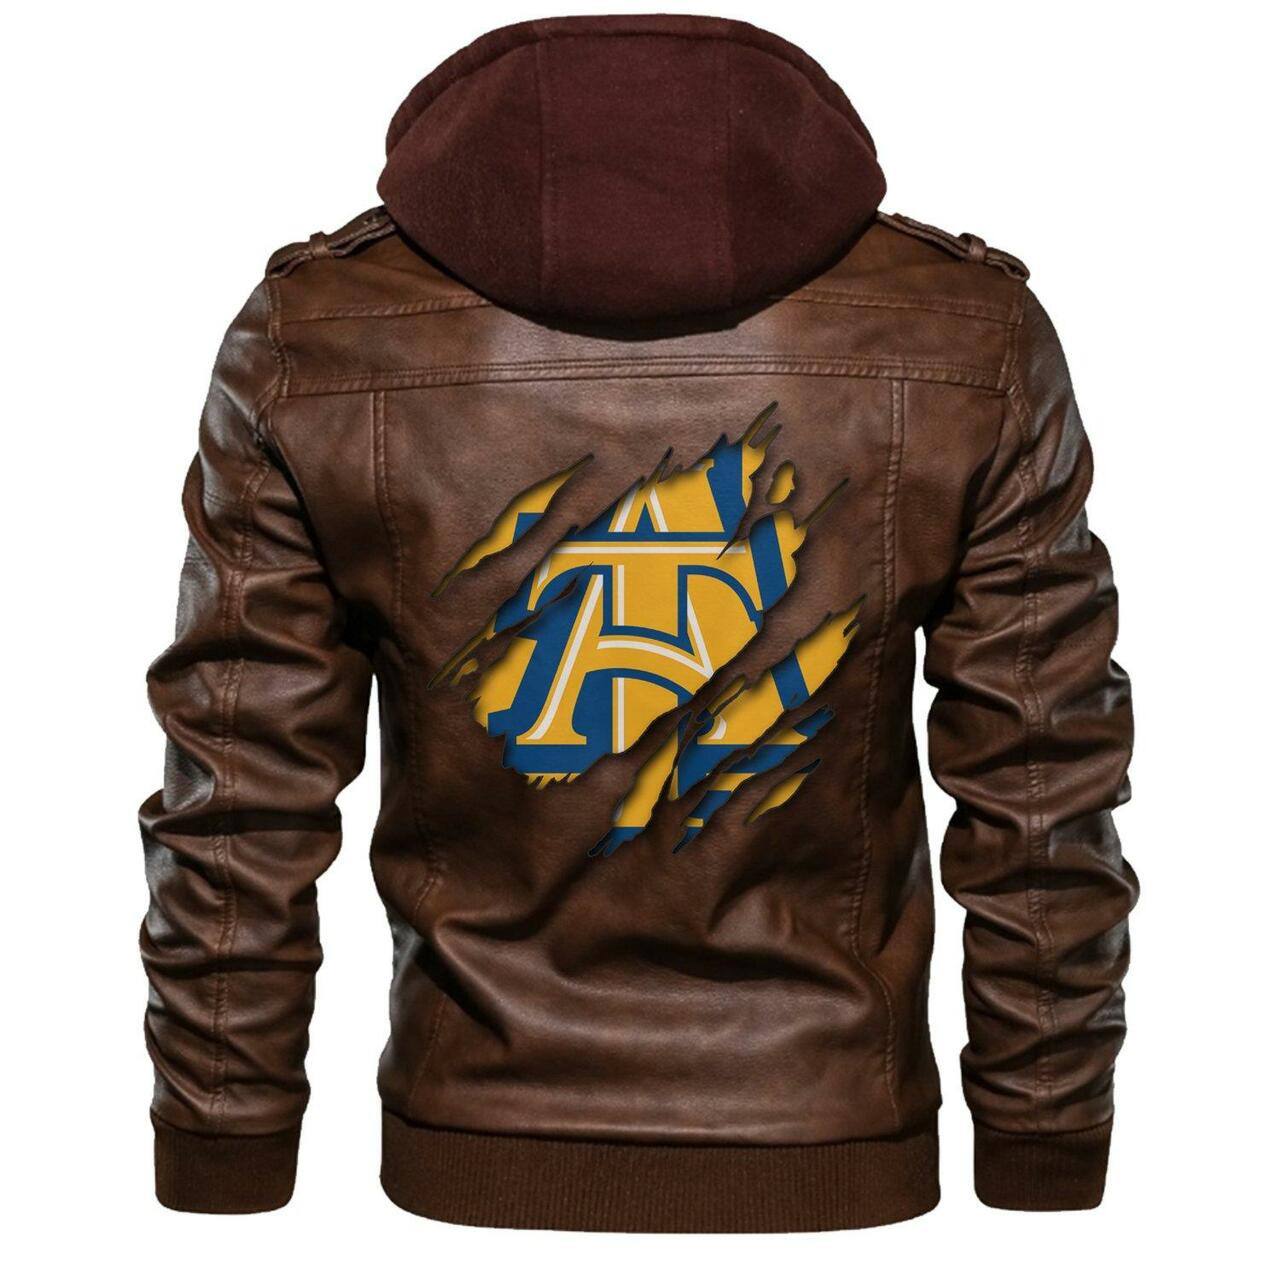 This leather Jacket will look great on you and make you stand out from the crowd 195